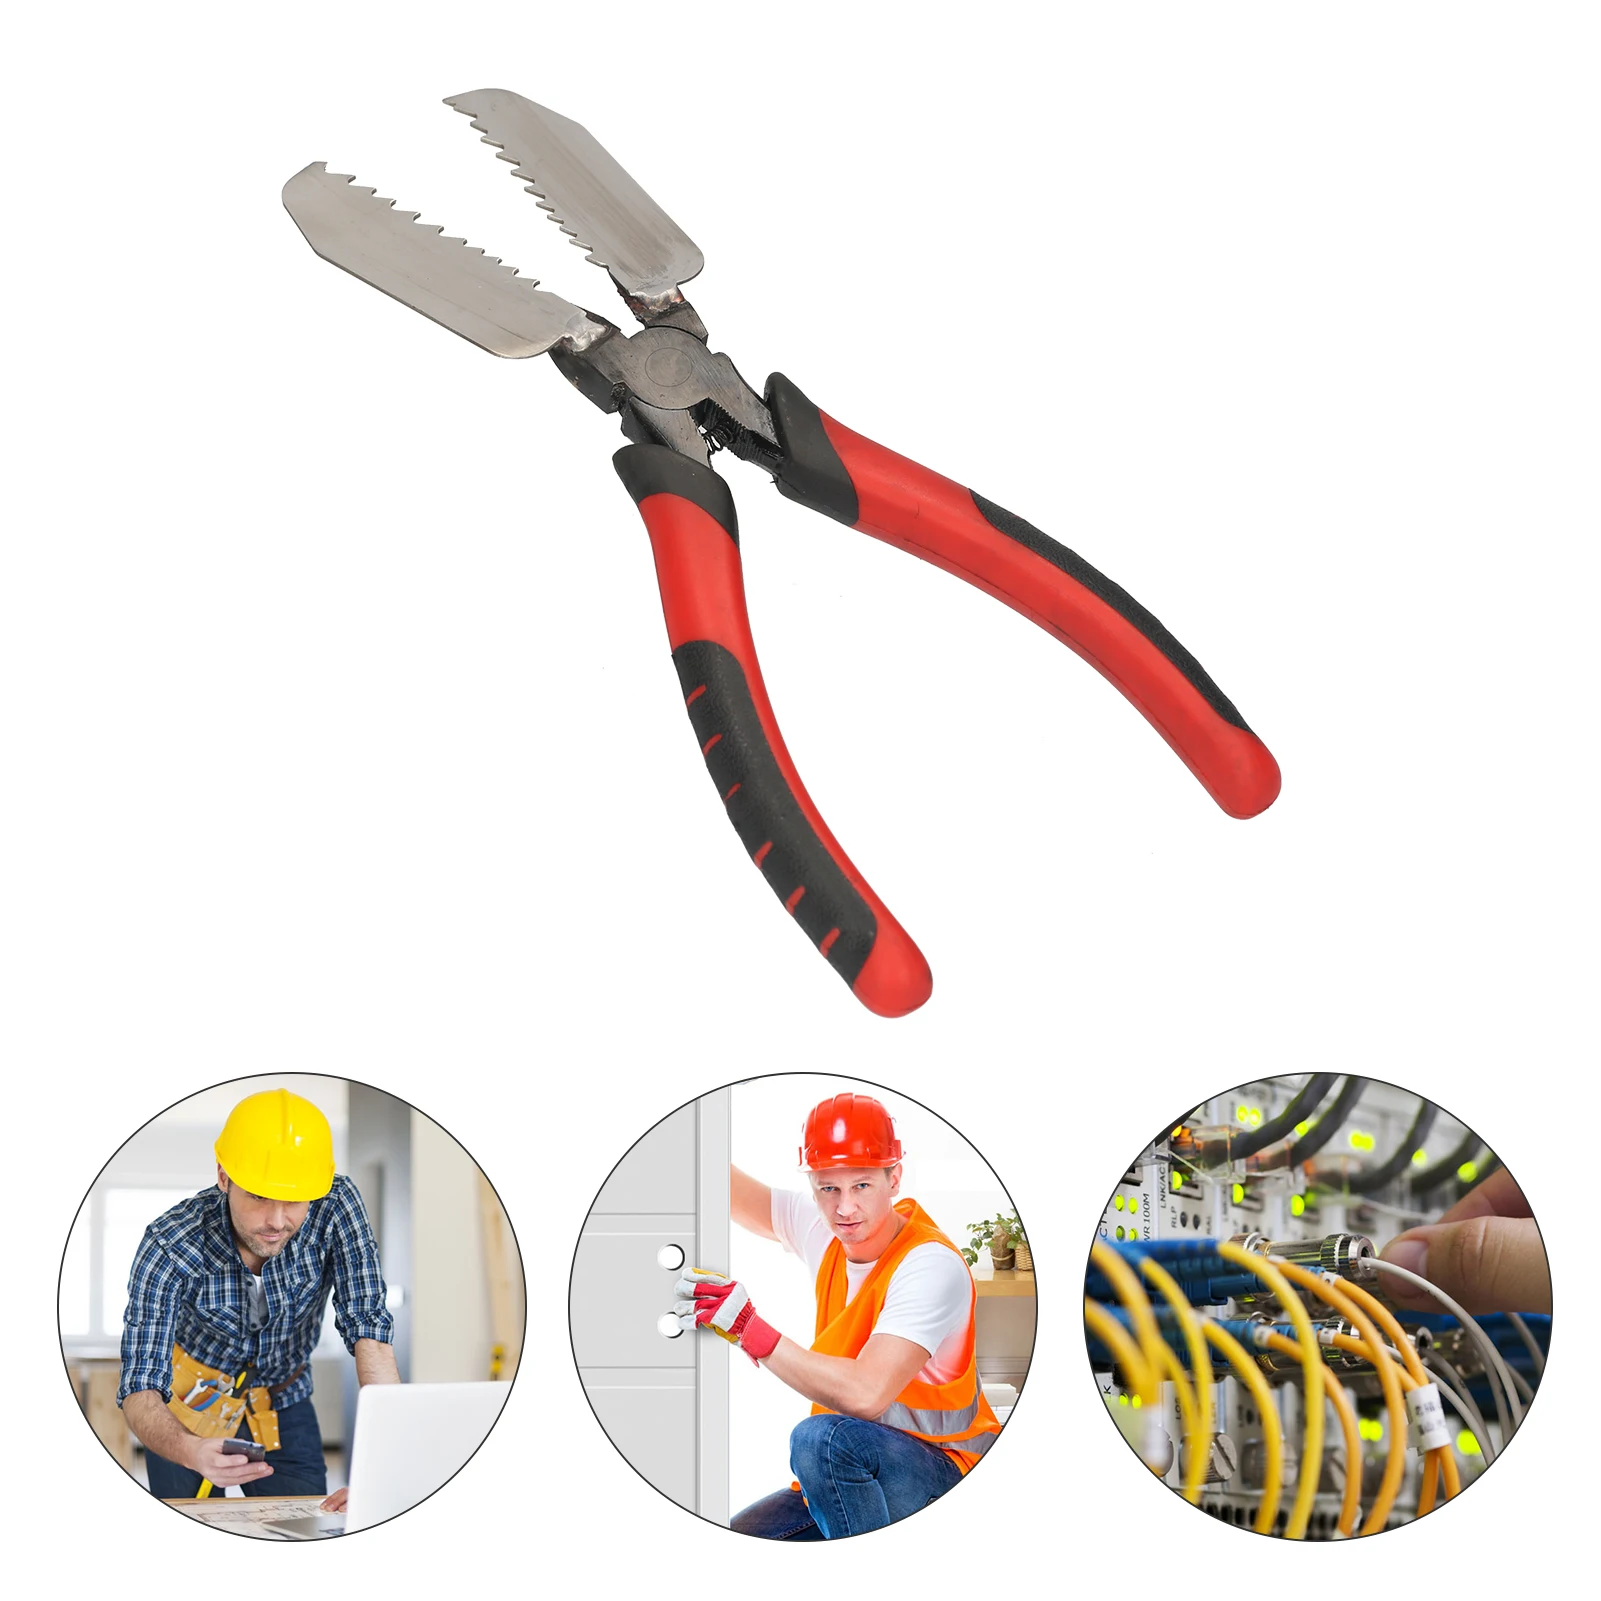 Unlocking Special Tools Panel Removal Pliers for Fixing Screws Door Lock Installation Panel Screw Removal&Assemble Pliers Clamp